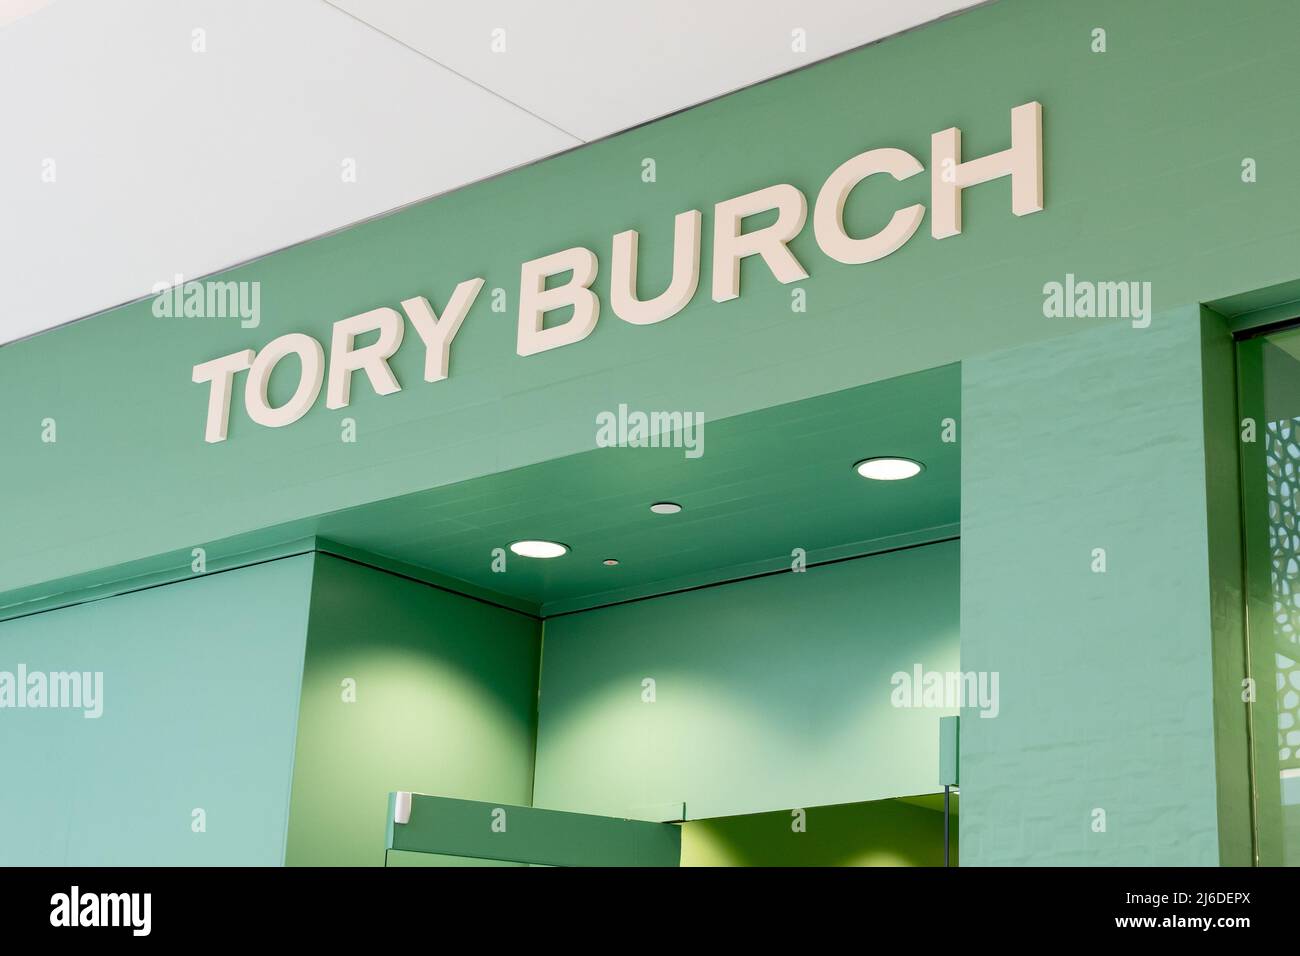 Houston, Texas, USA - February 25, 2022: A Tory Burch sign displayed over  the entrance to the store in a shopping mall Stock Photo - Alamy